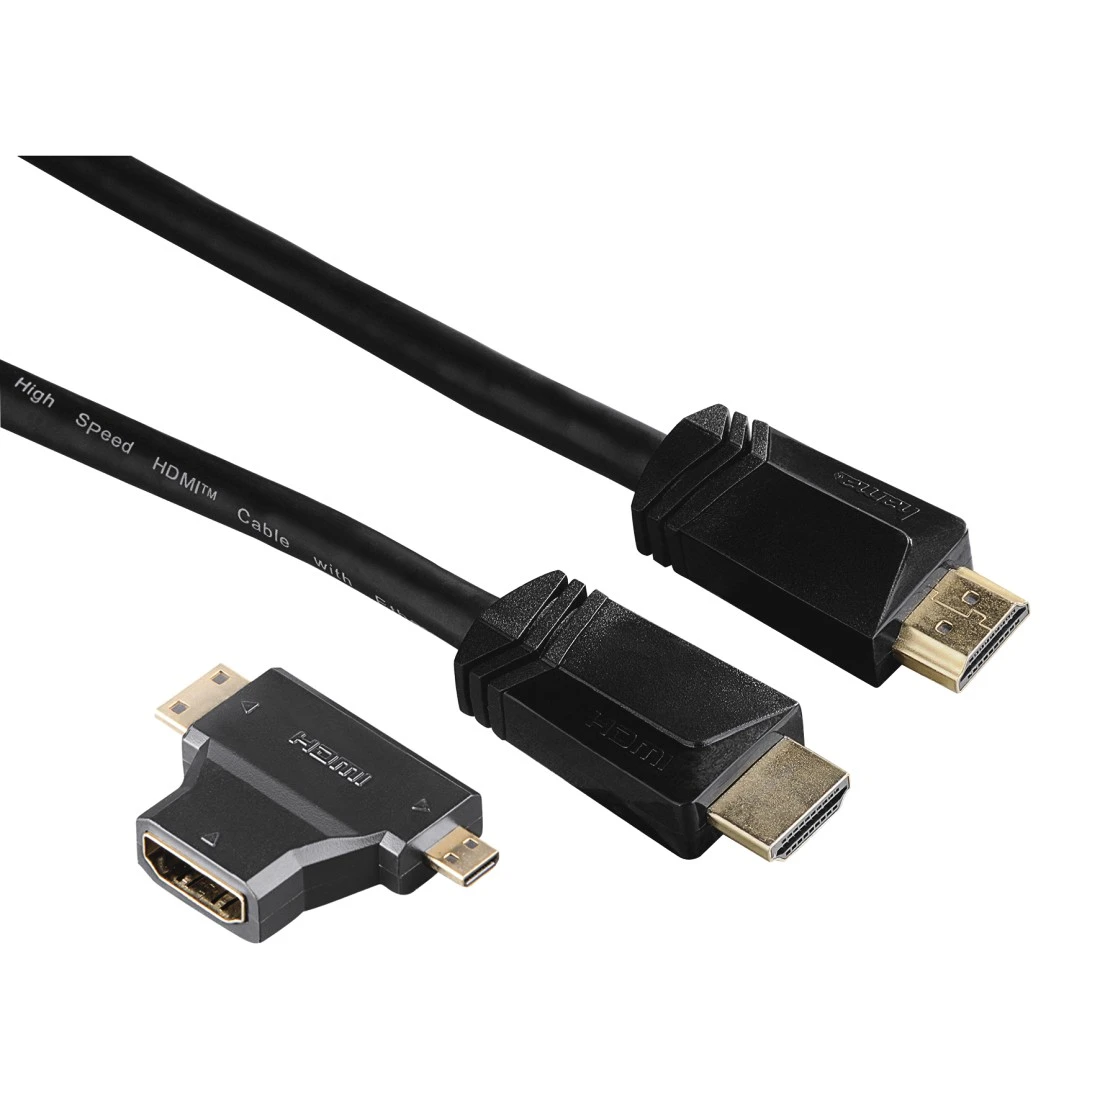 High speed HDMI™-kabel, connector-connector, ethernet, 1,5m + HDMI™-adapter  | Hama